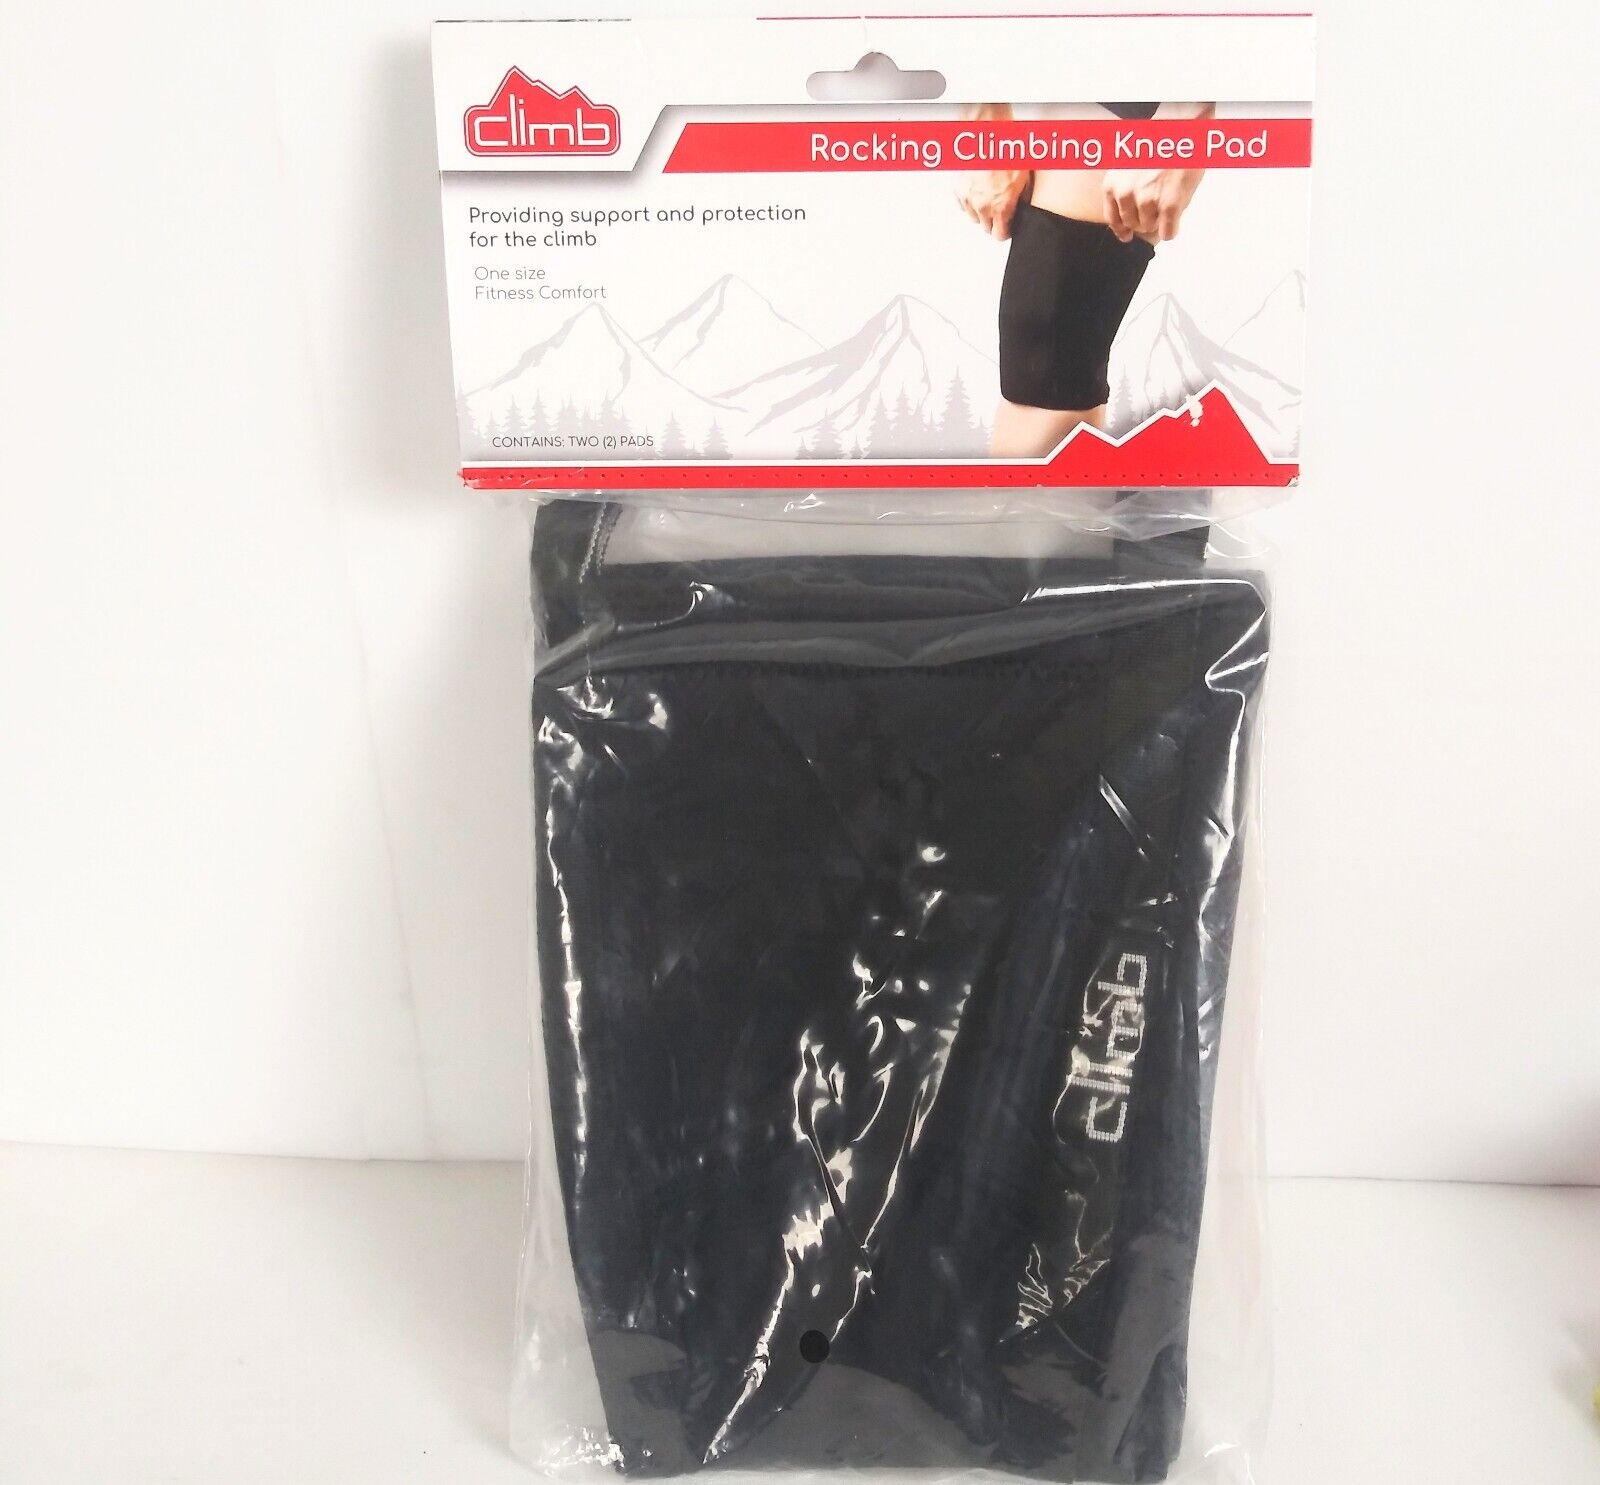 New Climb Rocking Climbing Knee Pad One Size Fitness Comfort Contains 2 Pads